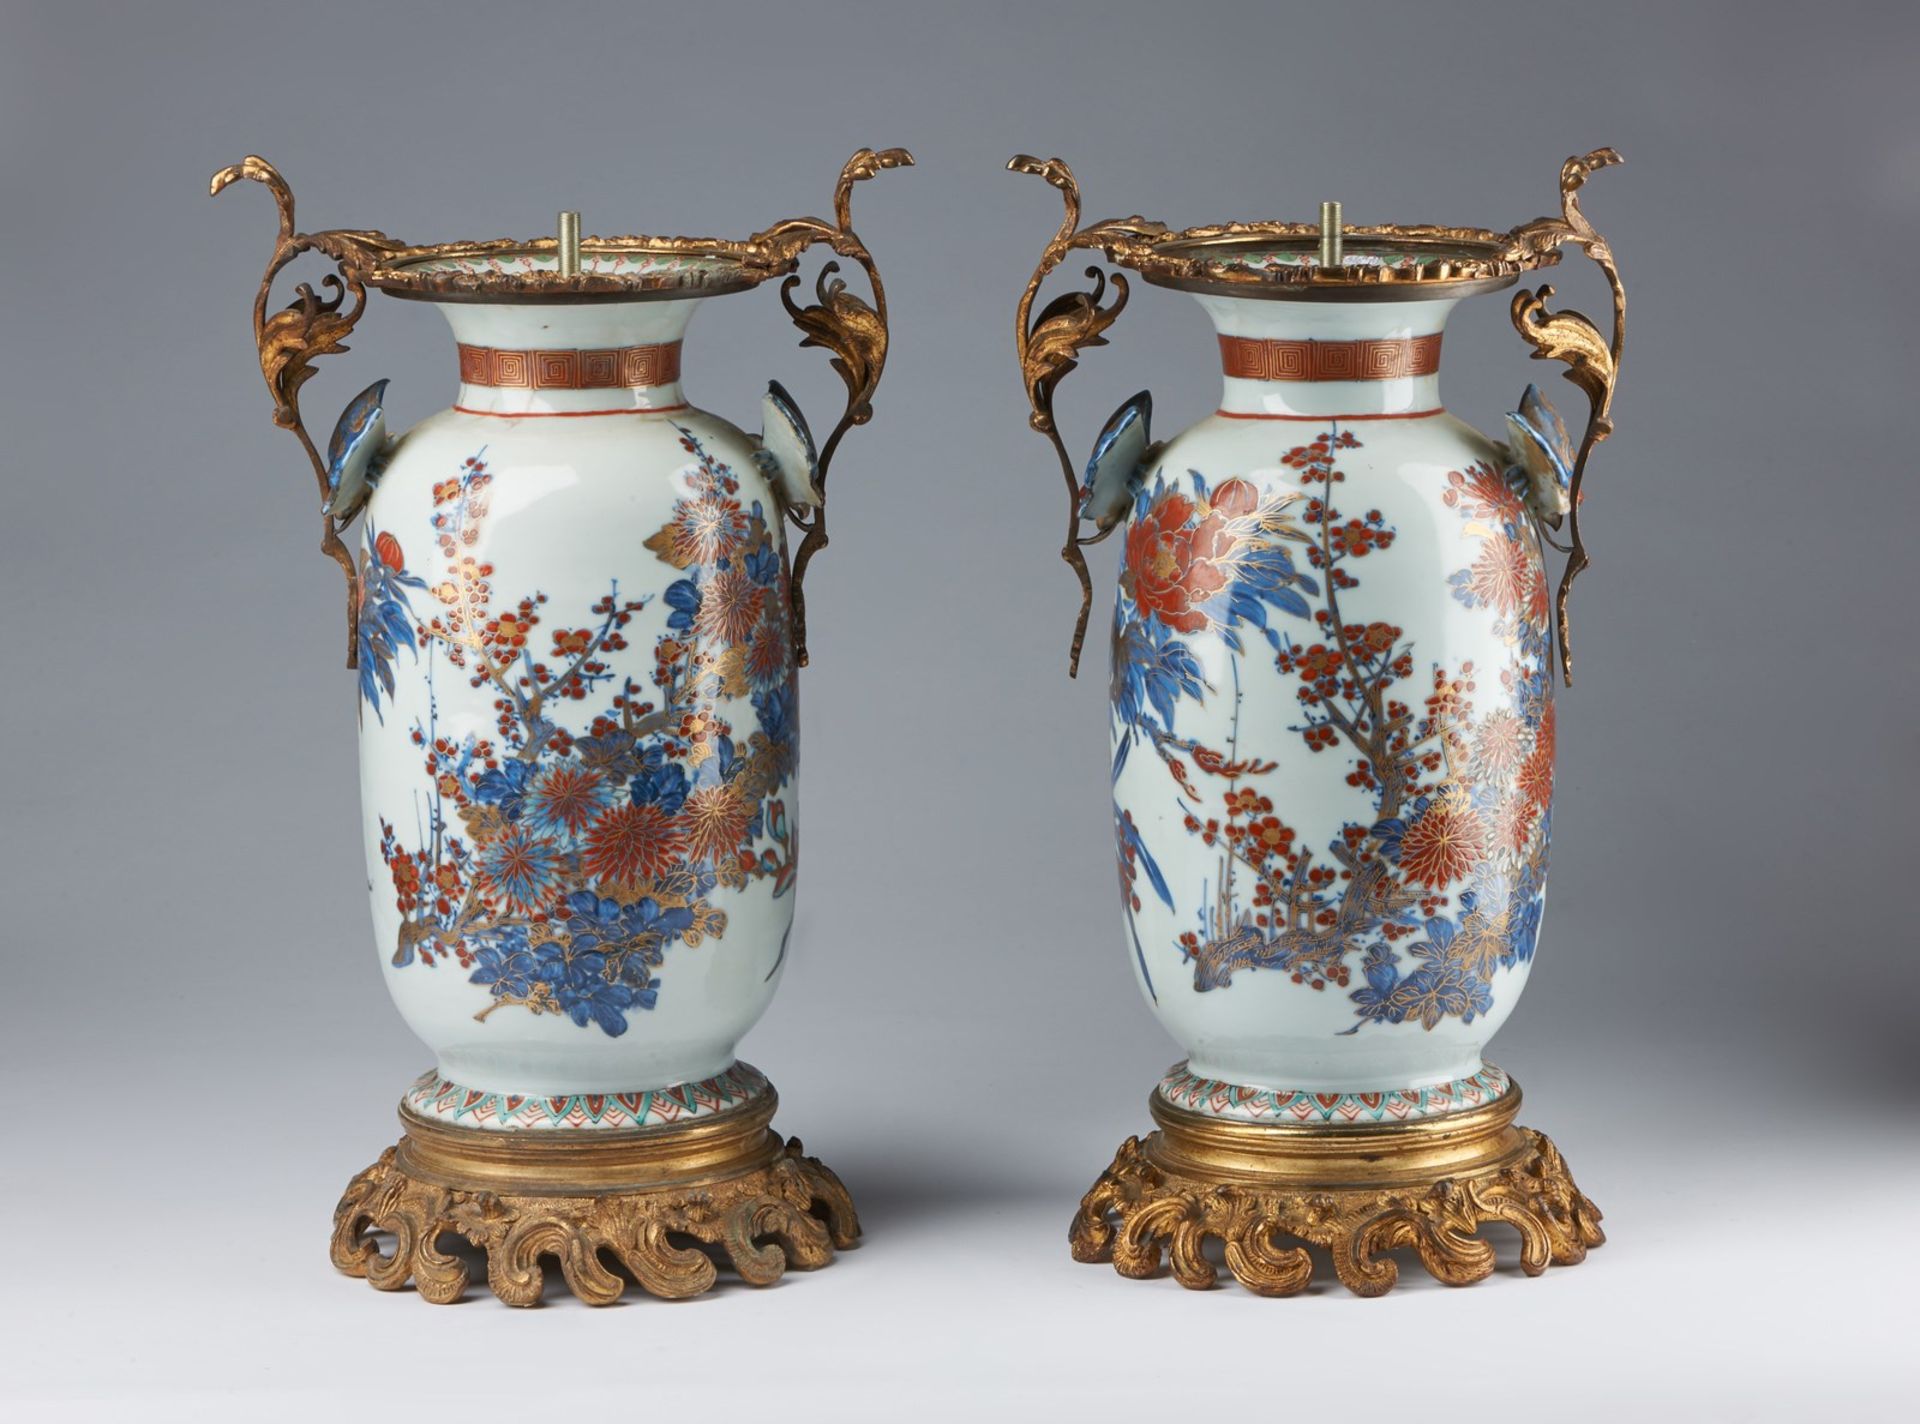 ARTE GIAPPONESE A pair of Imari pocelain vases with European bronze mount Japan, 18th-19th century - Image 3 of 4